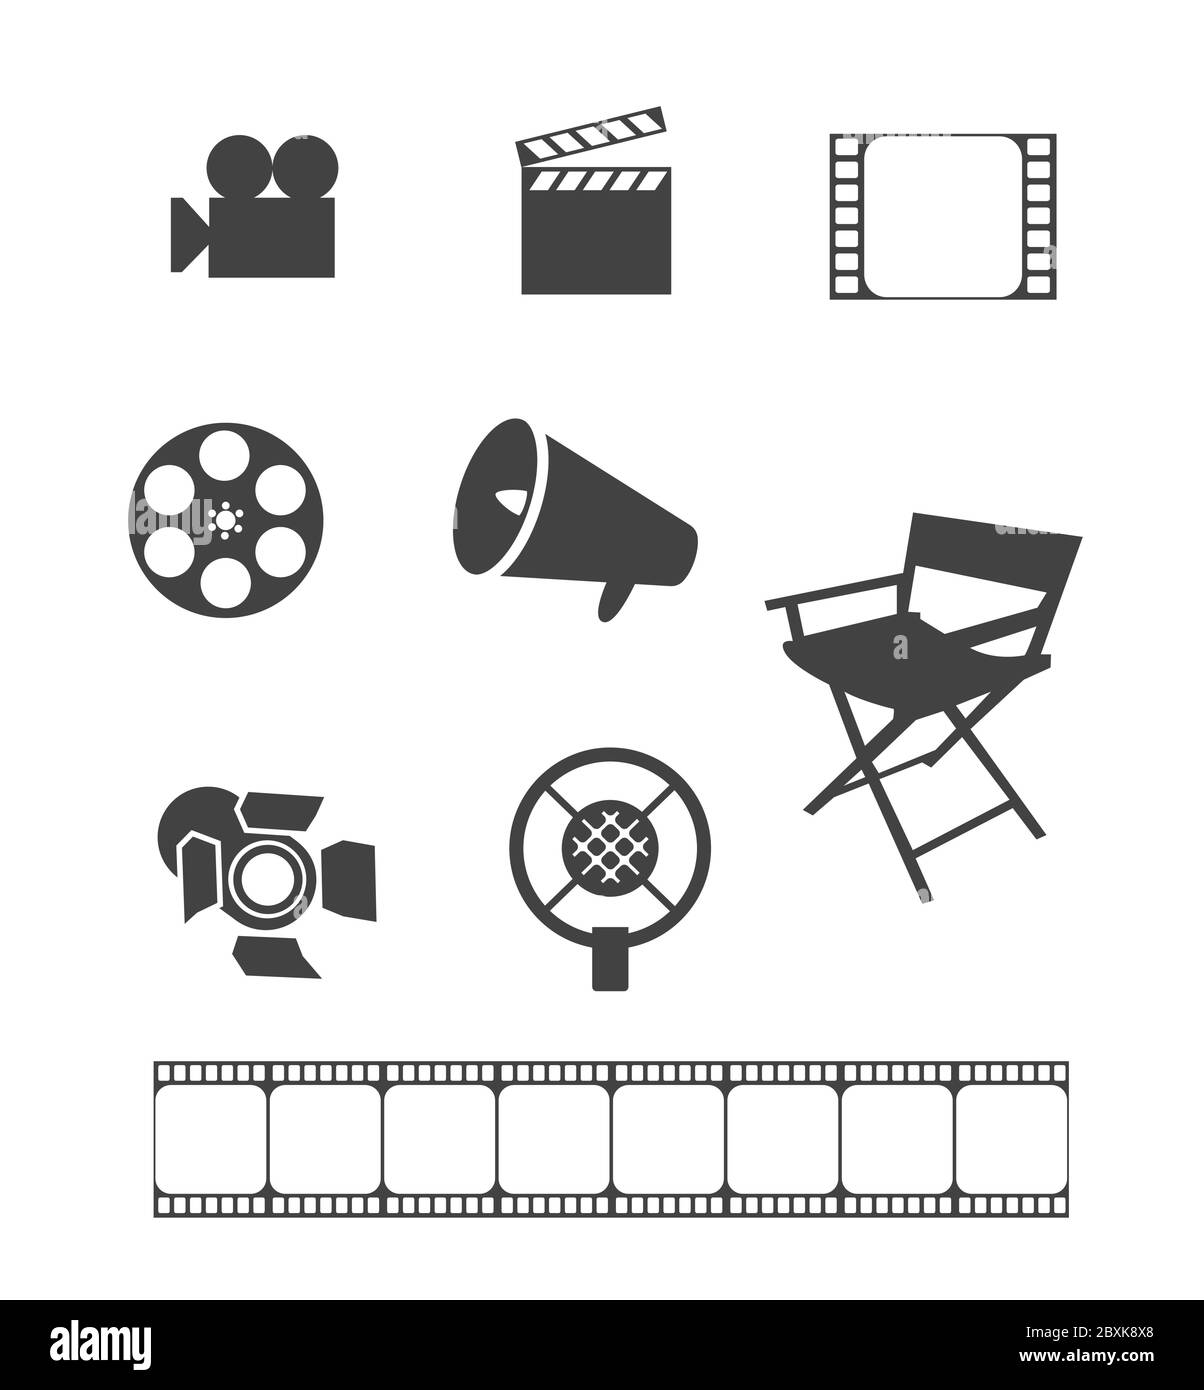 Cinema icon set. Movie making flat vector illustration. Cinematography graphic isolated icon collection. Director's chair, camera, cut, tape, speaker Stock Vector